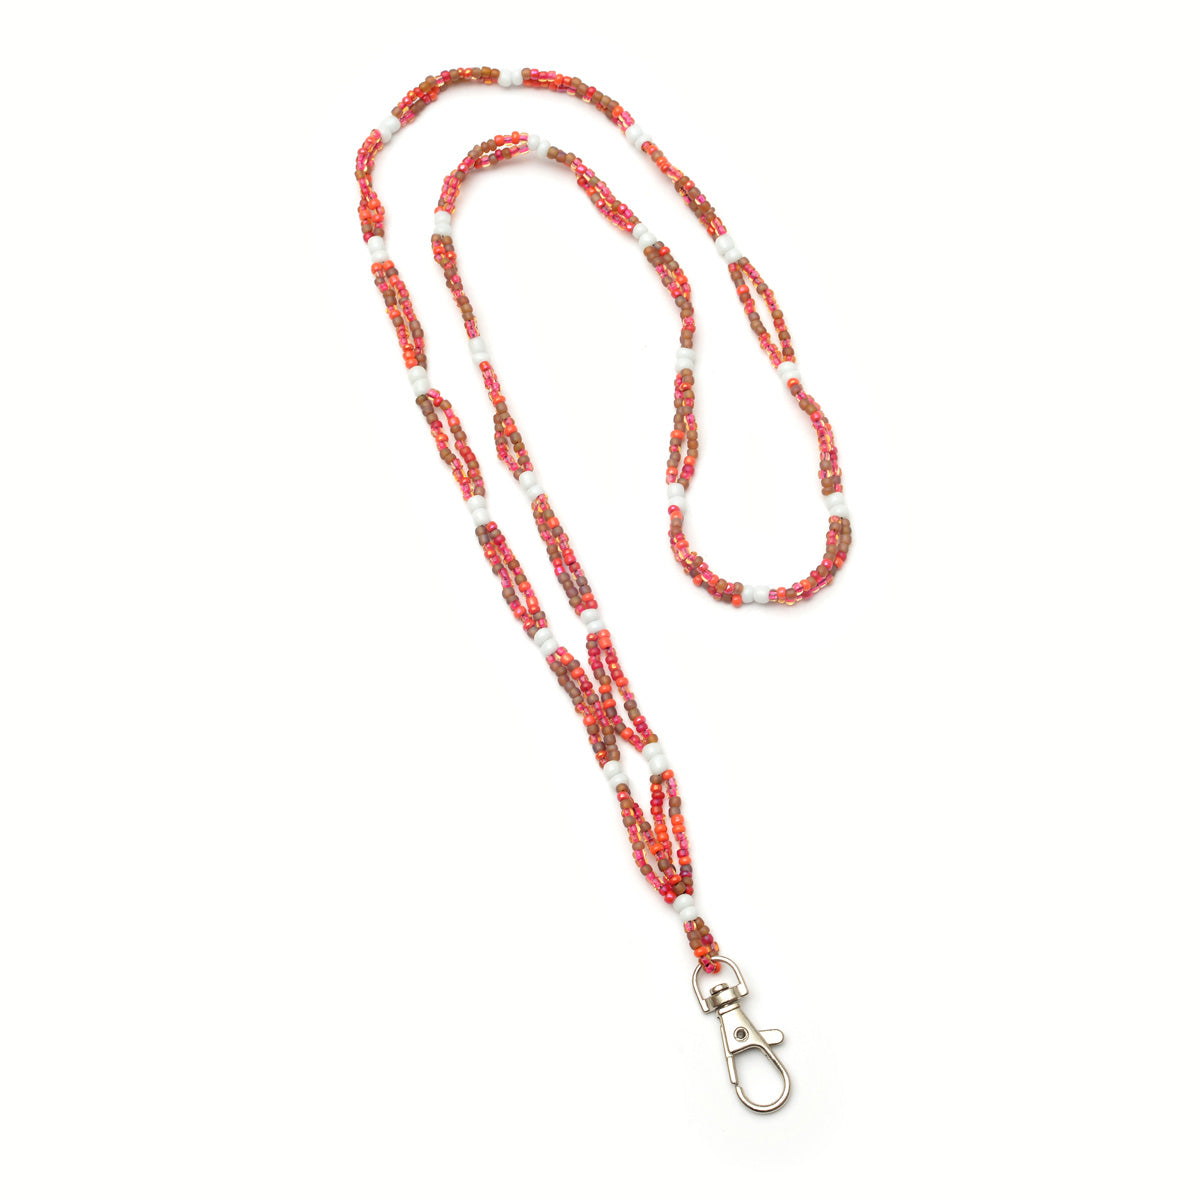 Beaded Lanyard: Double String Lanyard with Snap Hook